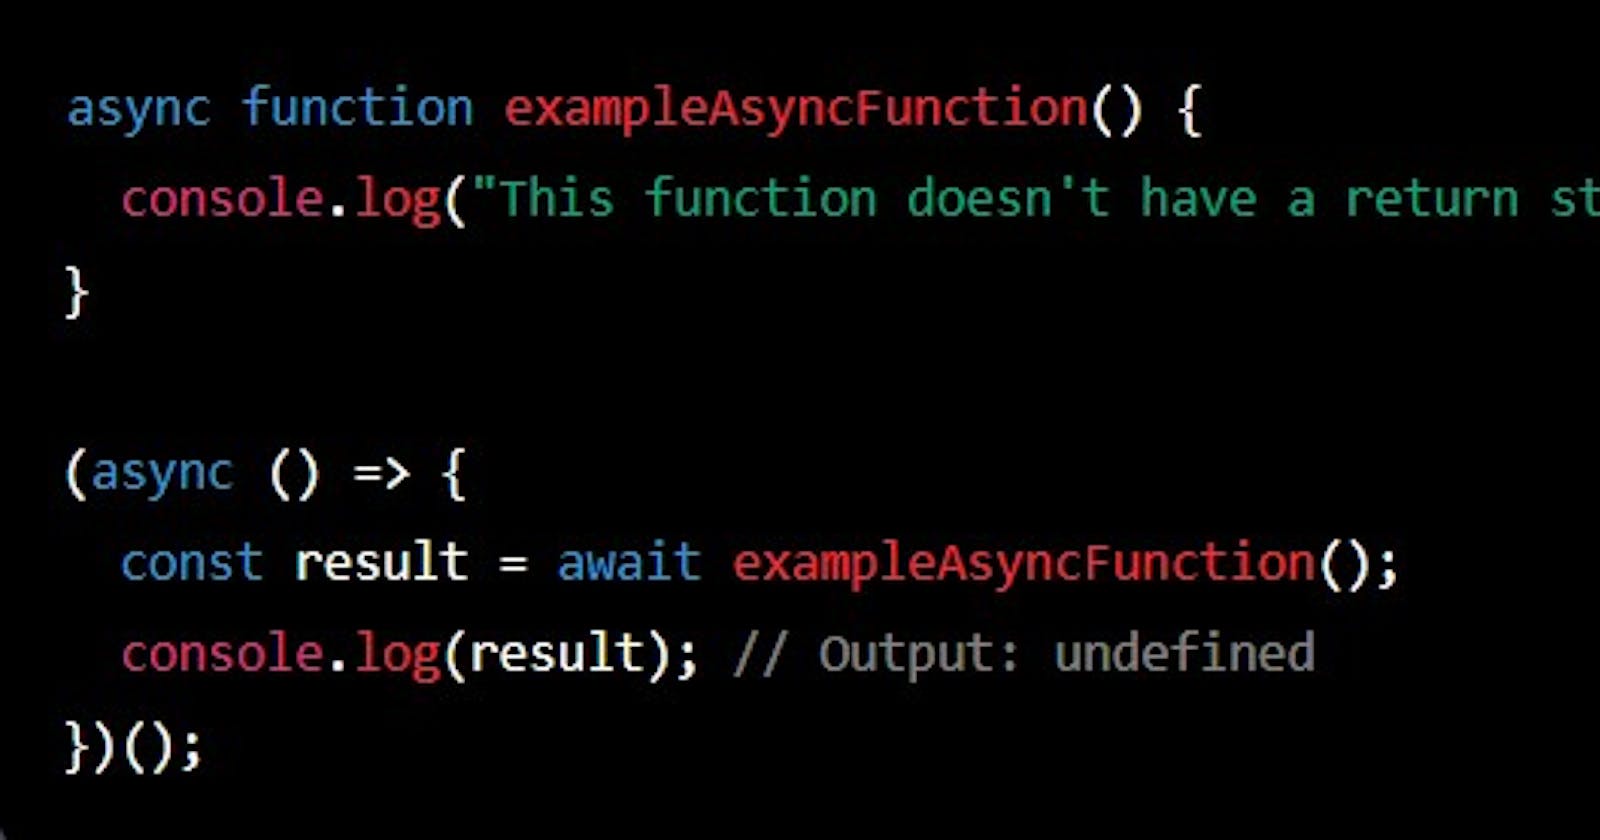 What if I do not mention the return statement in the async function?